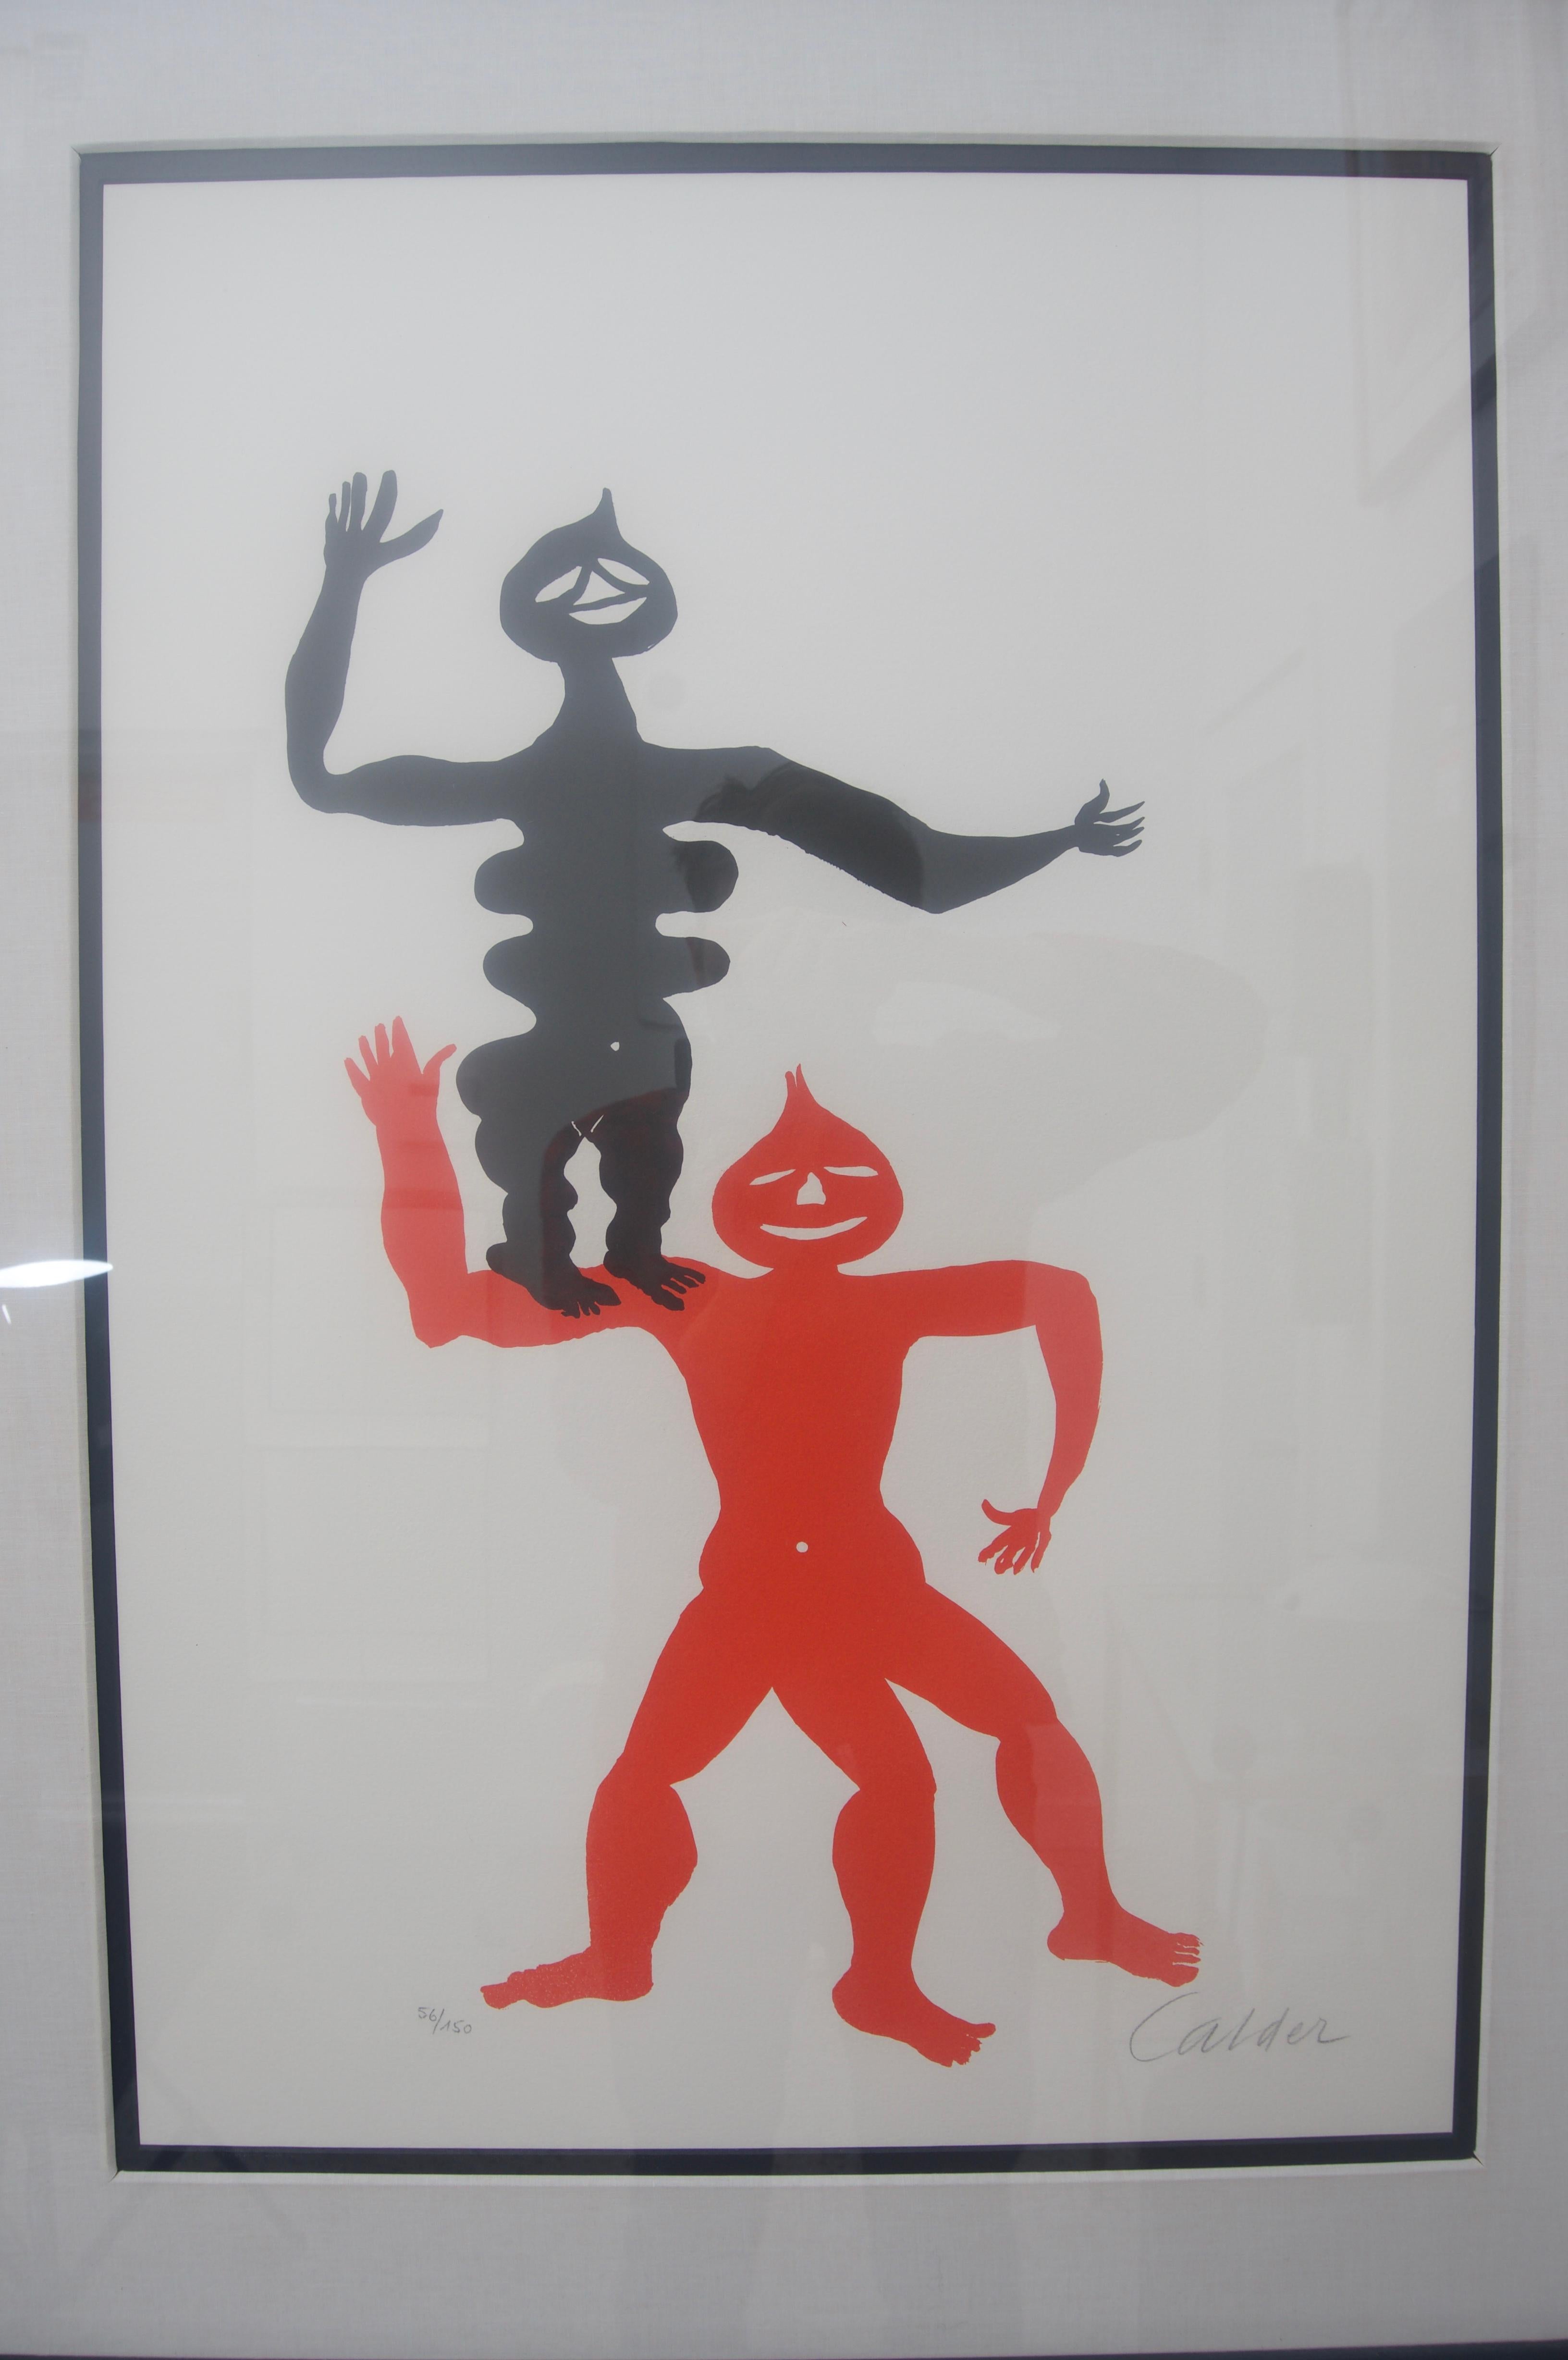 The Acrobats Lithograph by Calder is a rare piece. Original period frame with archival matting and paper.